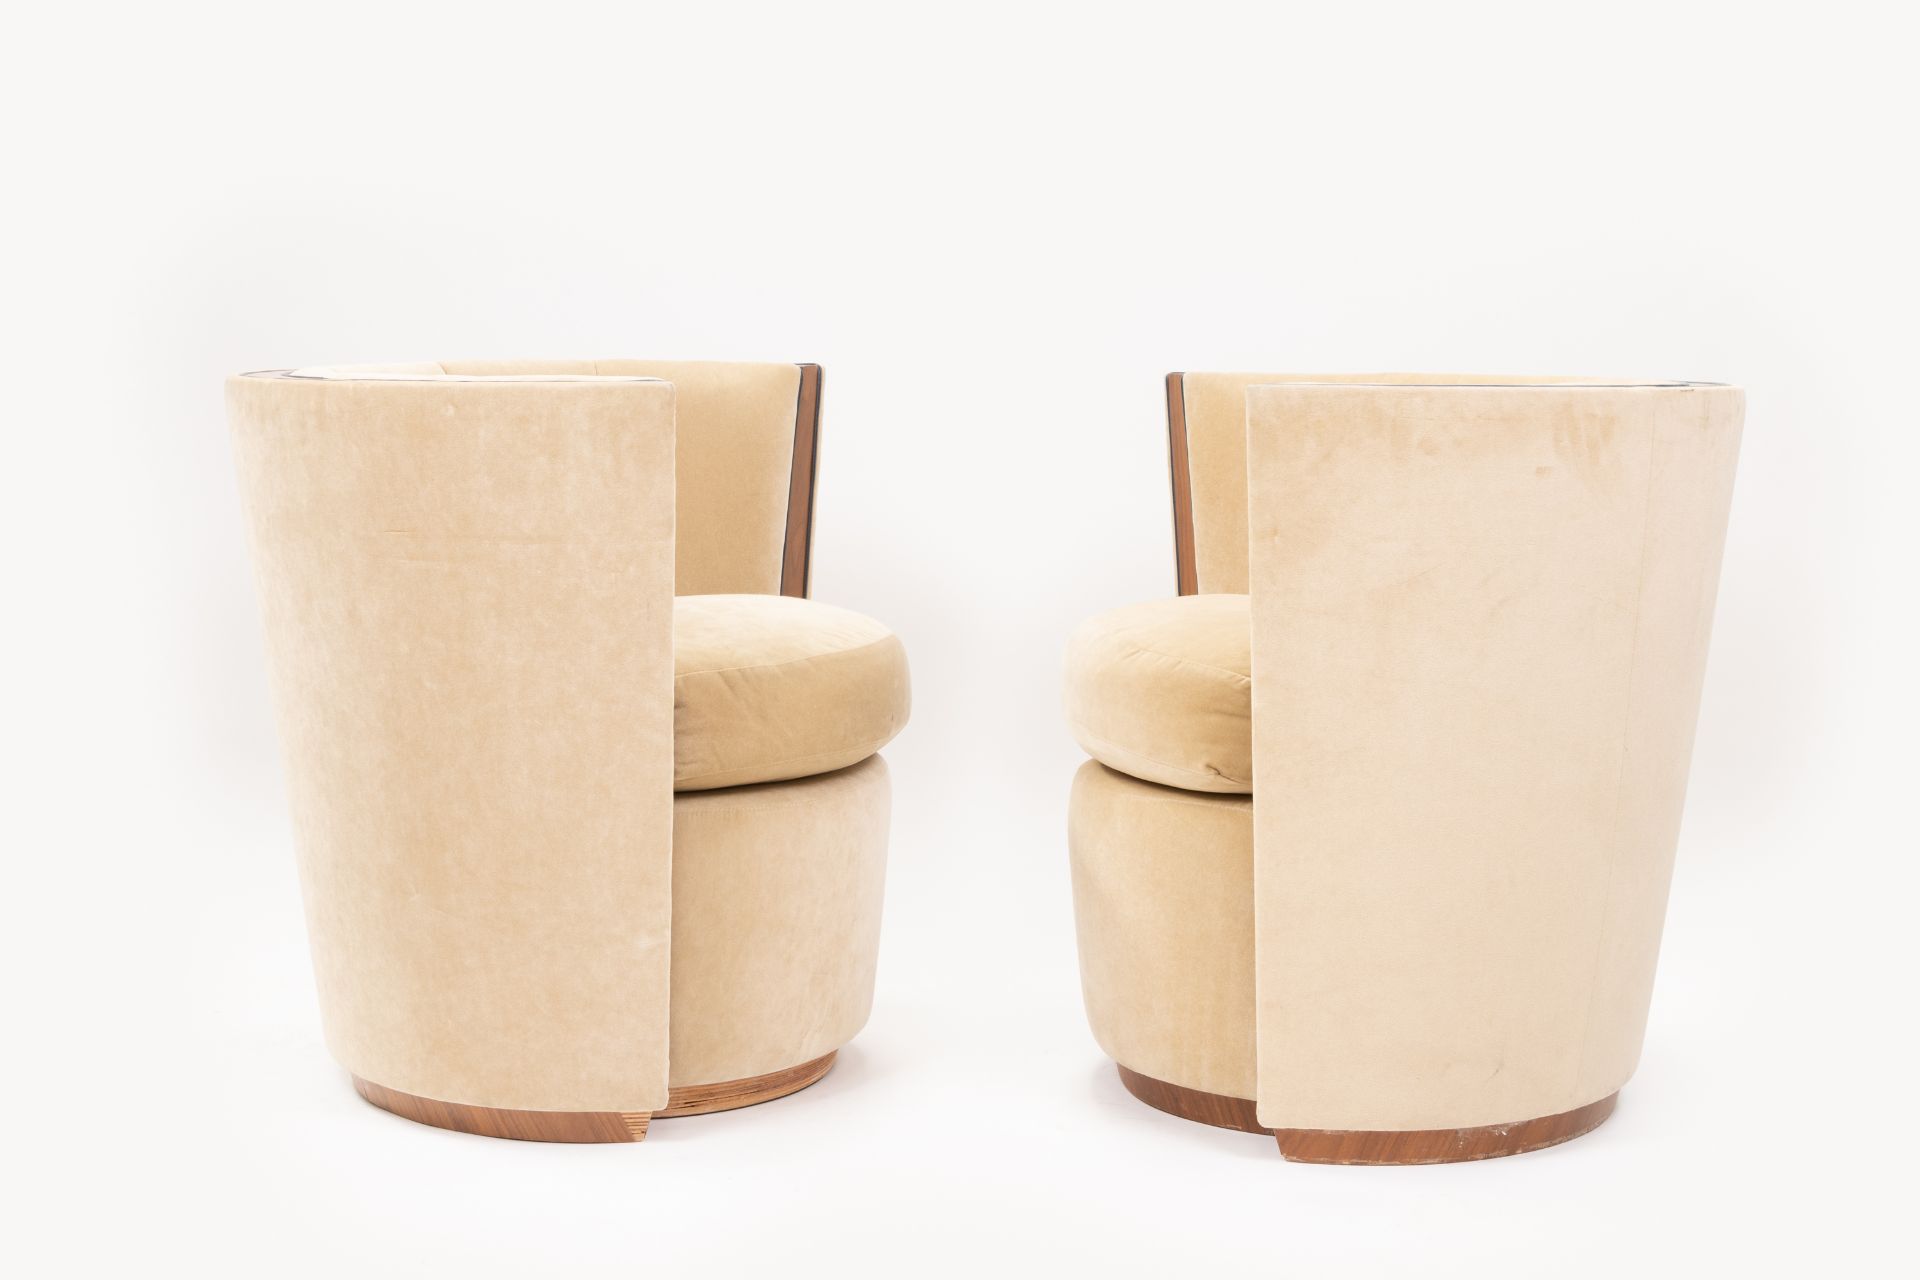 Pair of Bespoke Deco Tub Chairs Made for Claridge's by David Linley - Image 3 of 7